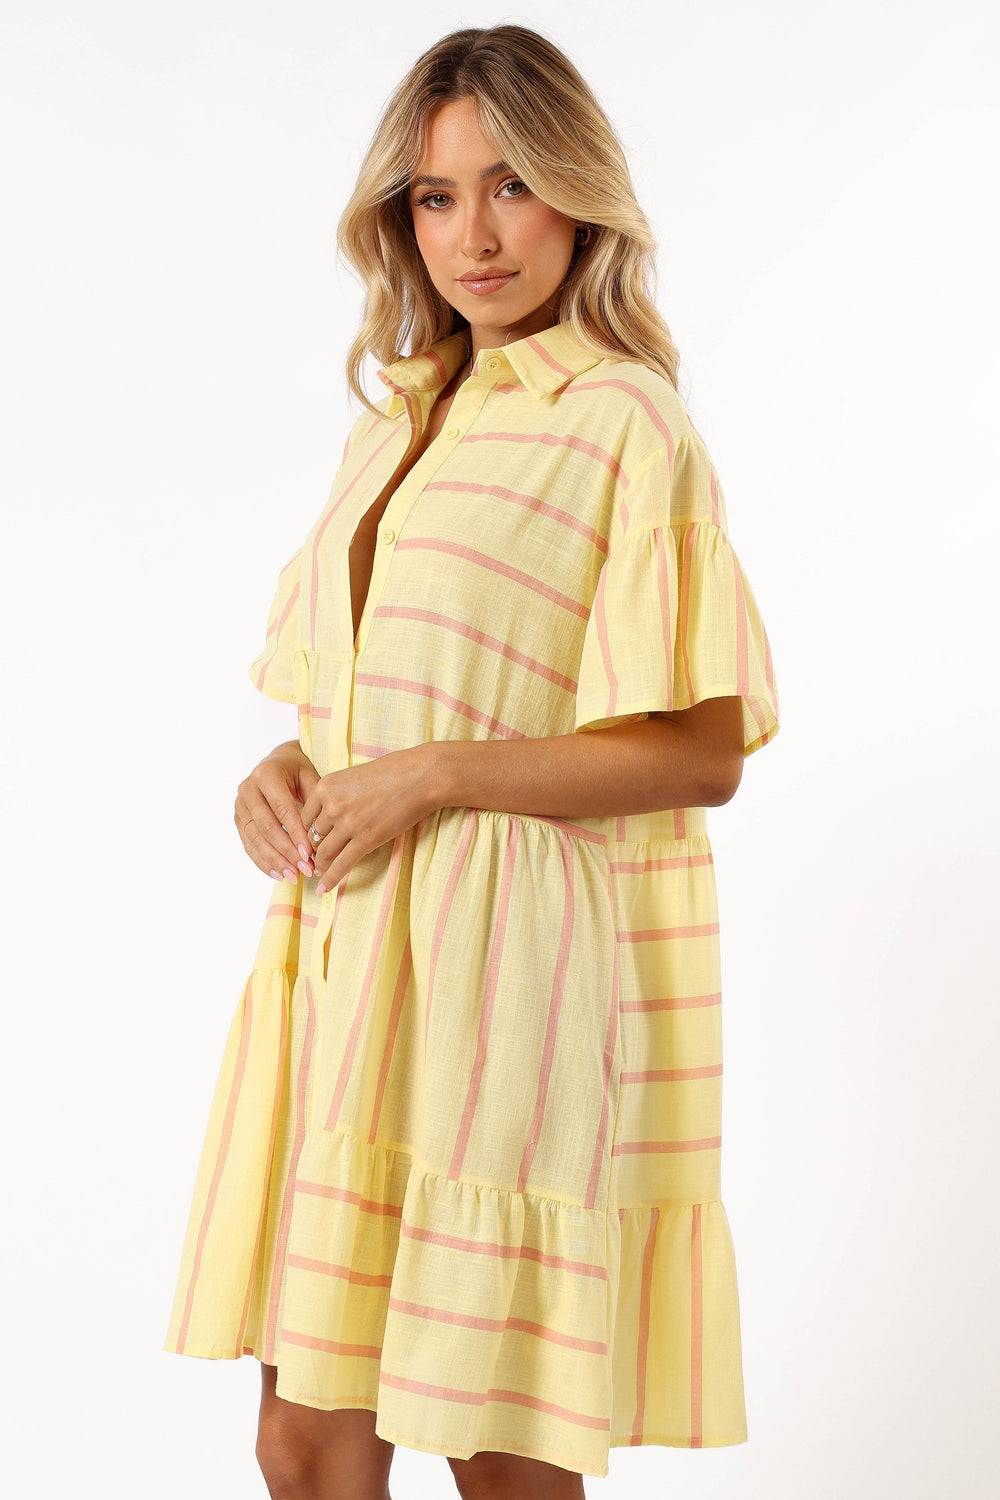 DRESSES @Peachy Mini Dress - Yellow Pink Stripe (Hold for Transitional Essentials)